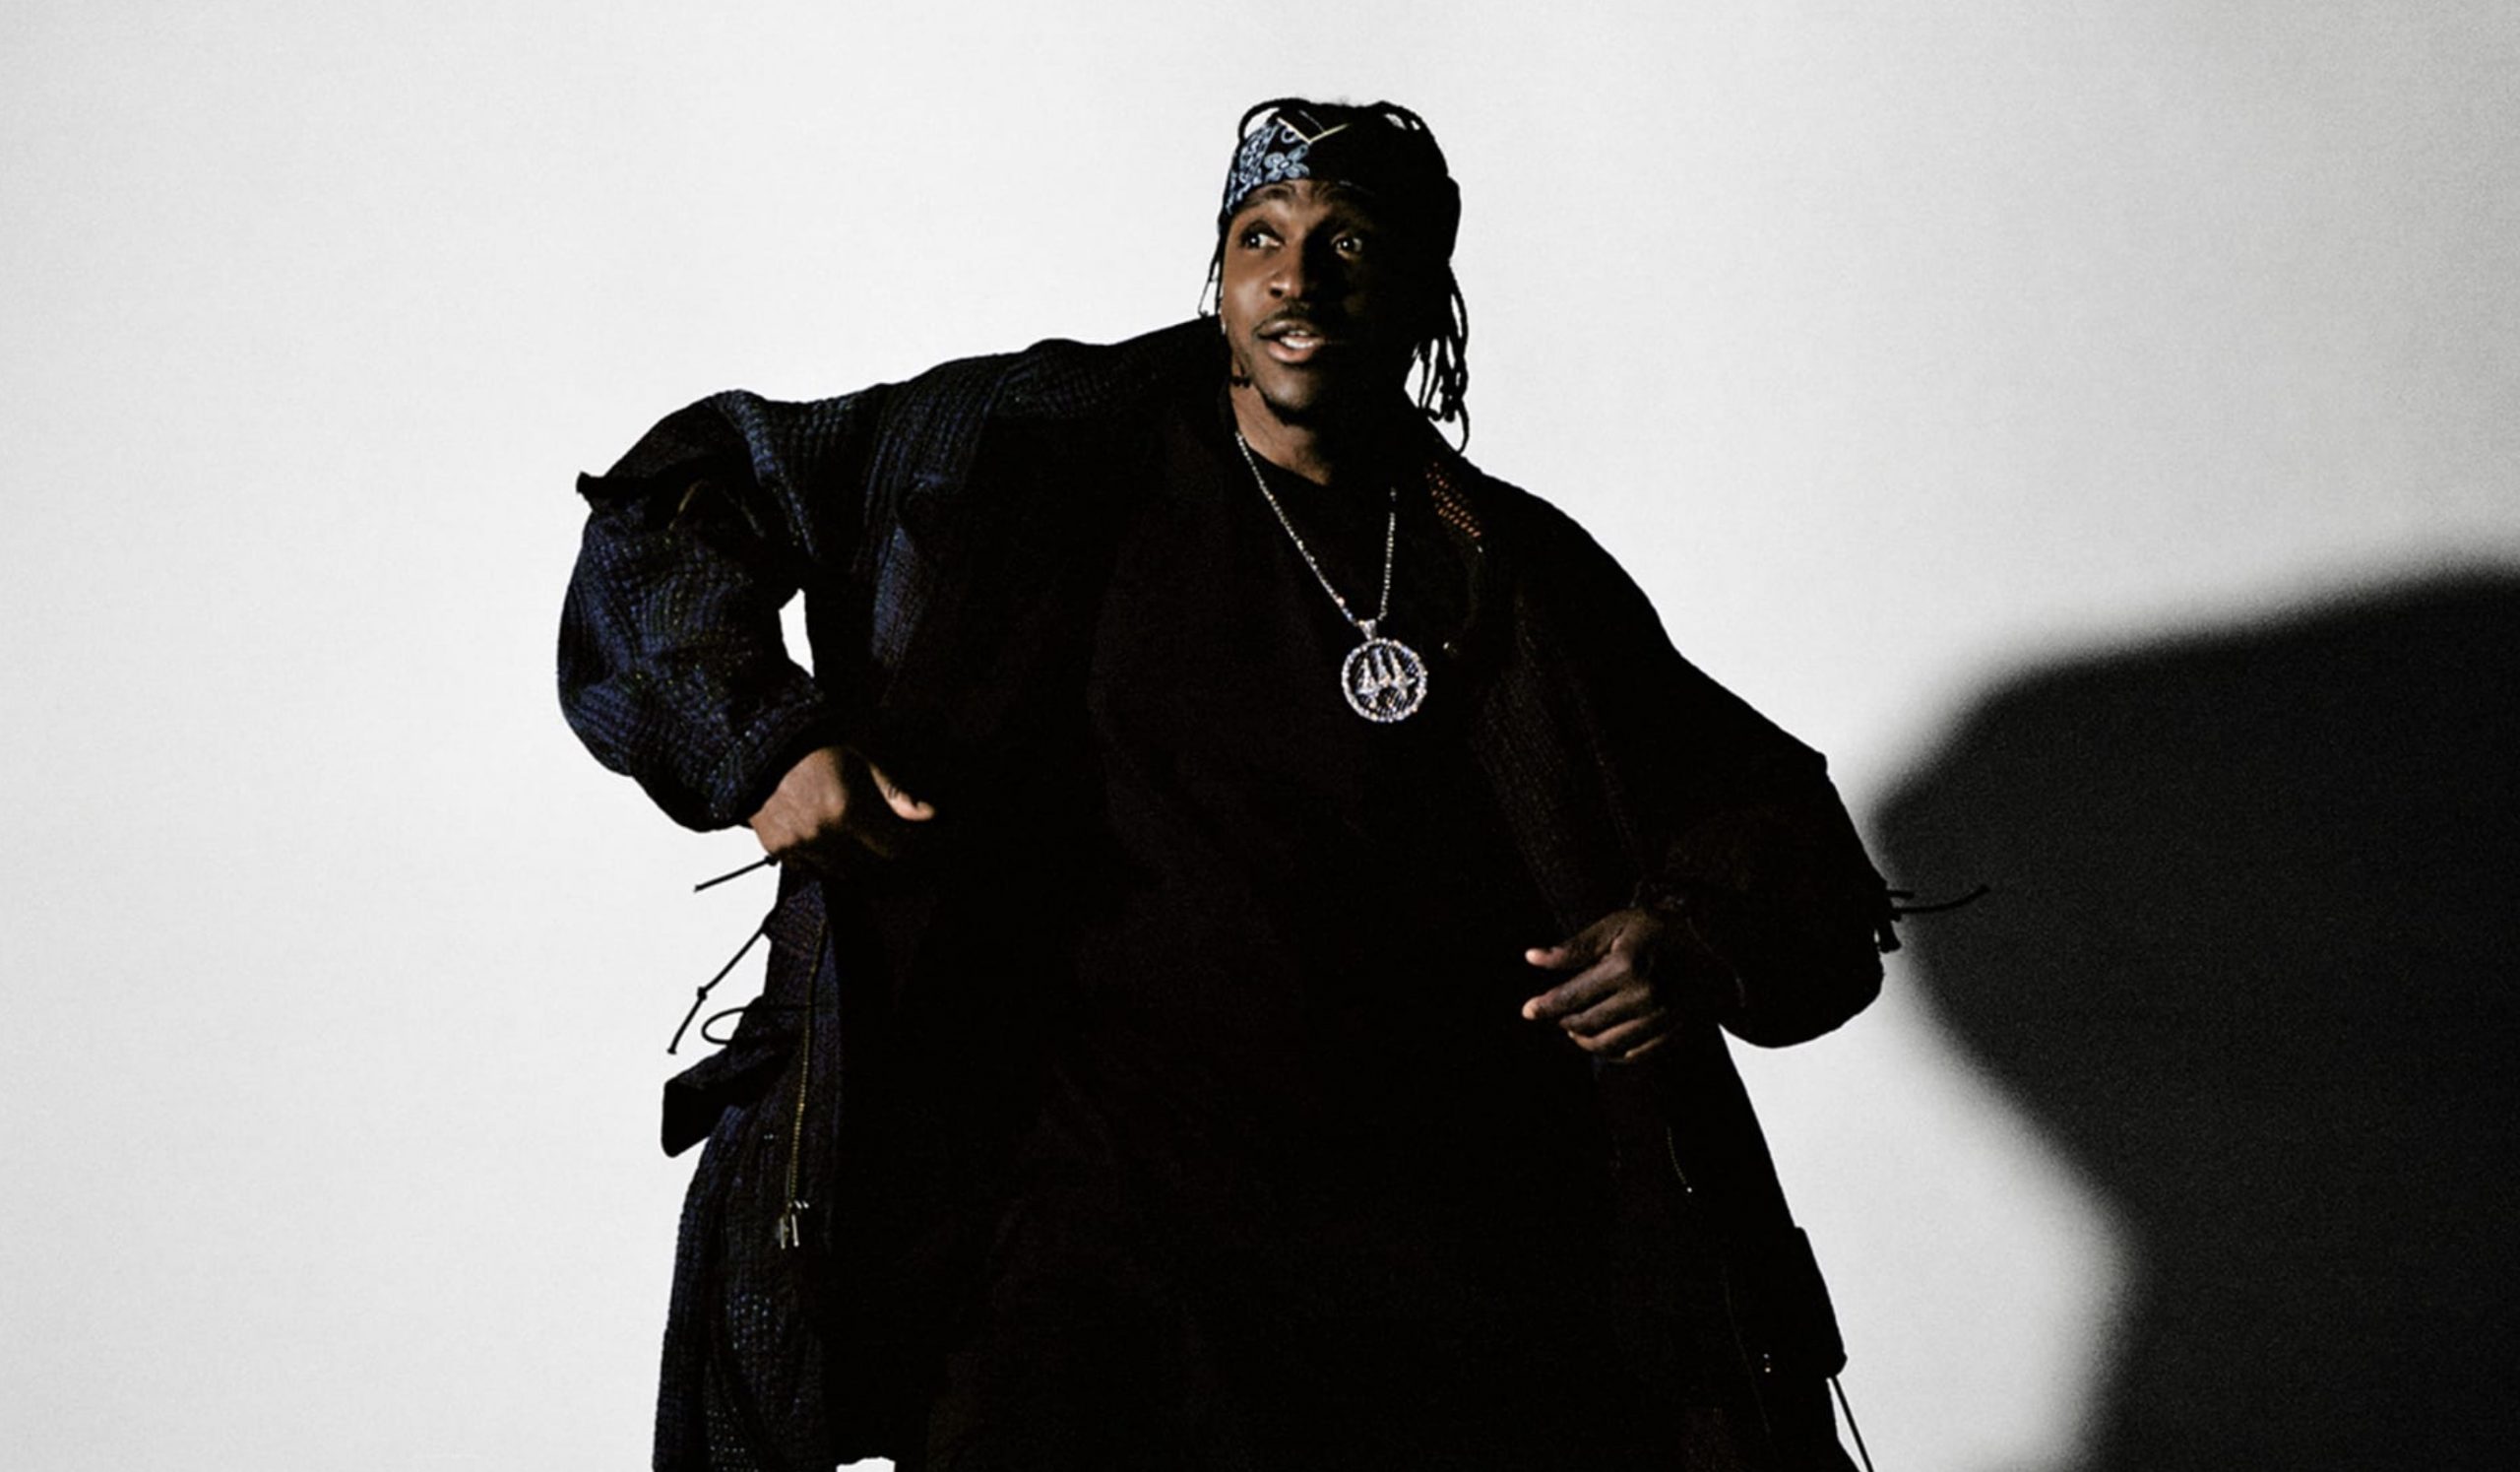 Pusha T Revisits His Discography With Elliott Wilson | HipHop-N-More